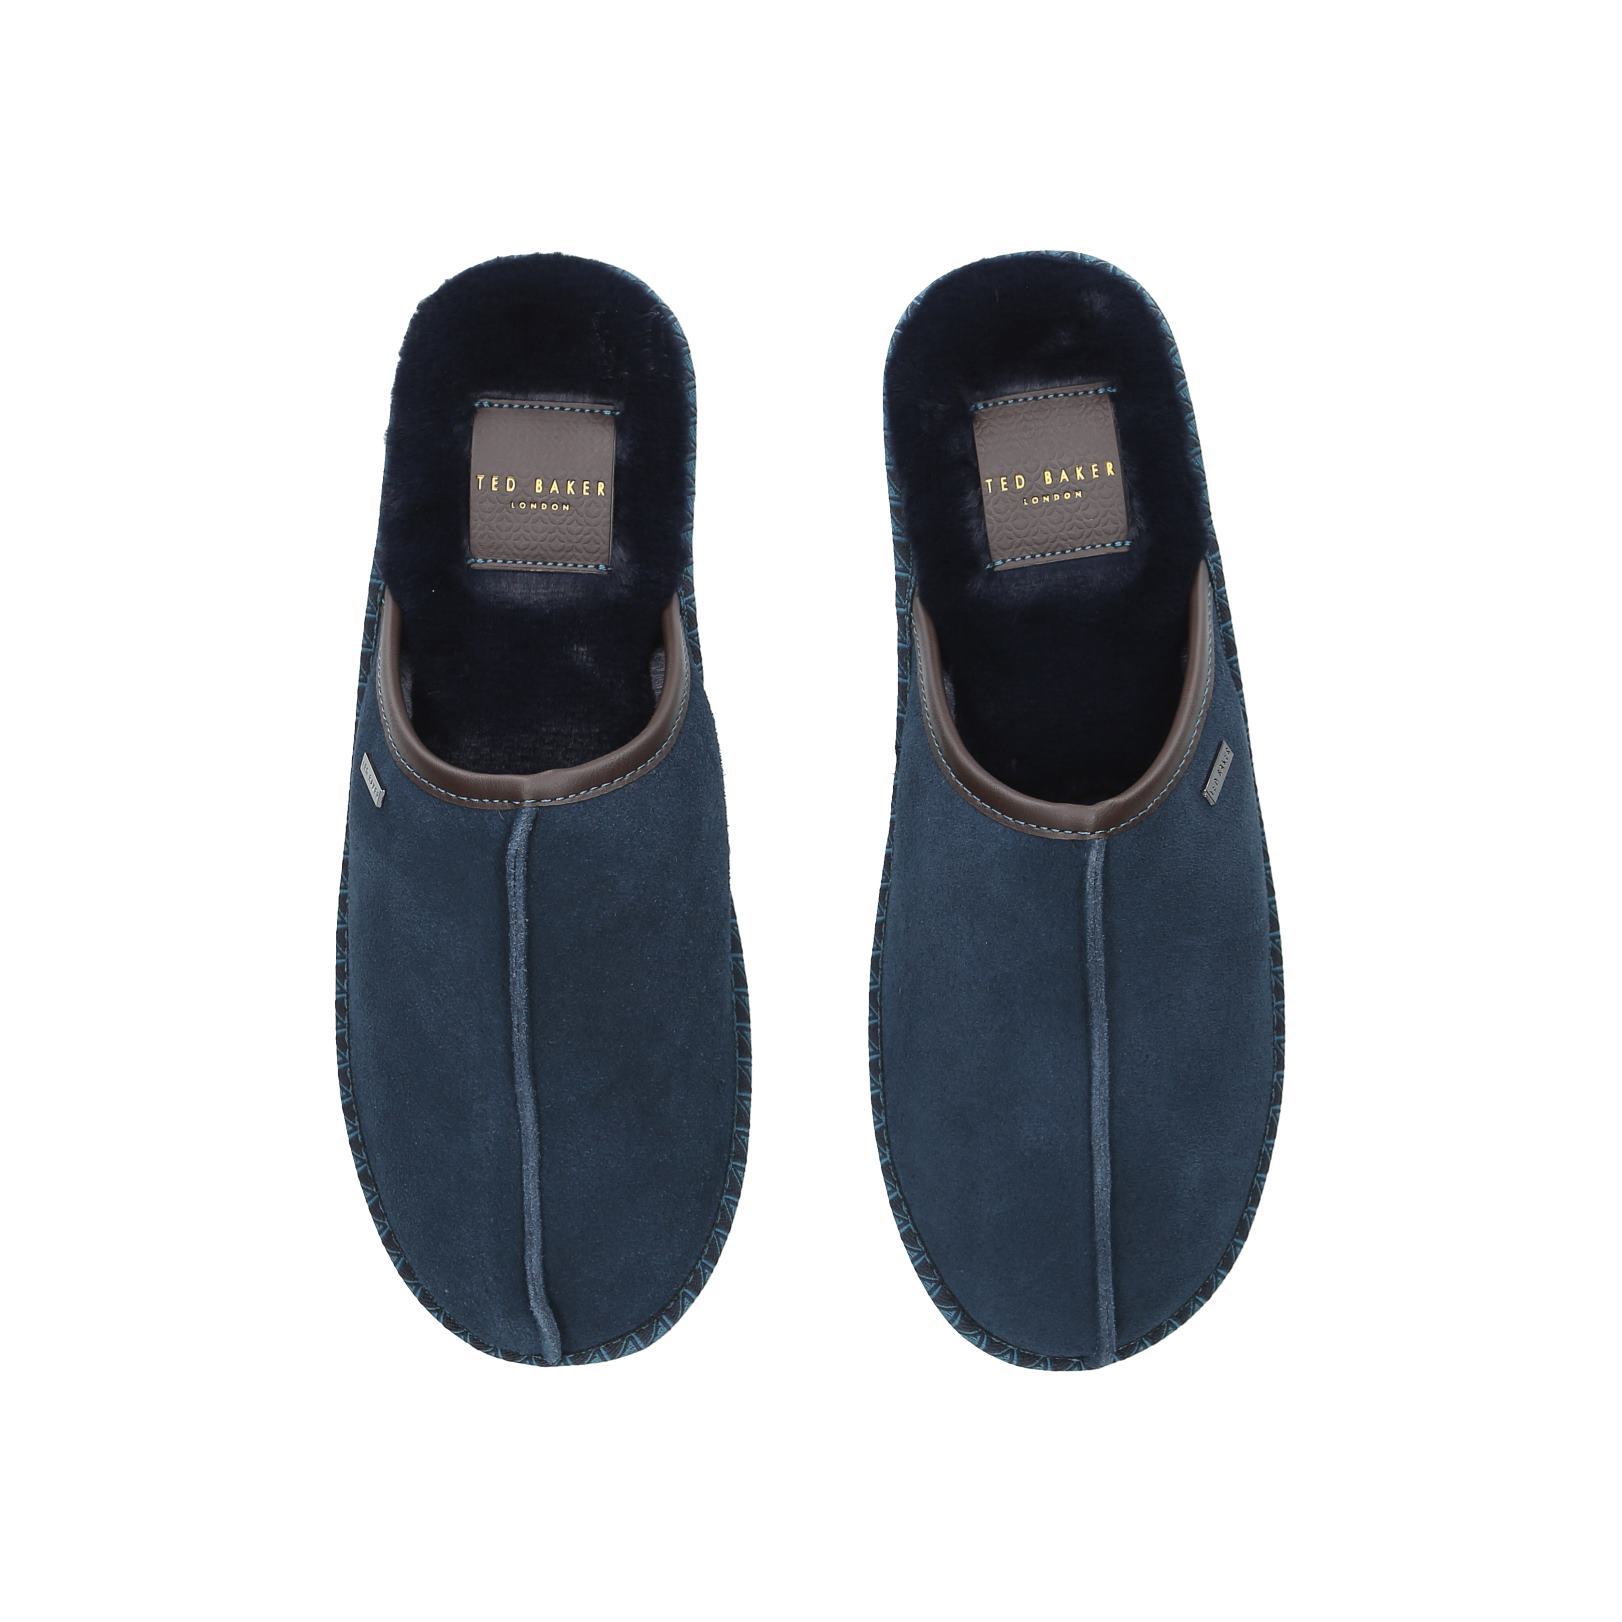 PATRICK SLIPPER - TED BAKER Casuals